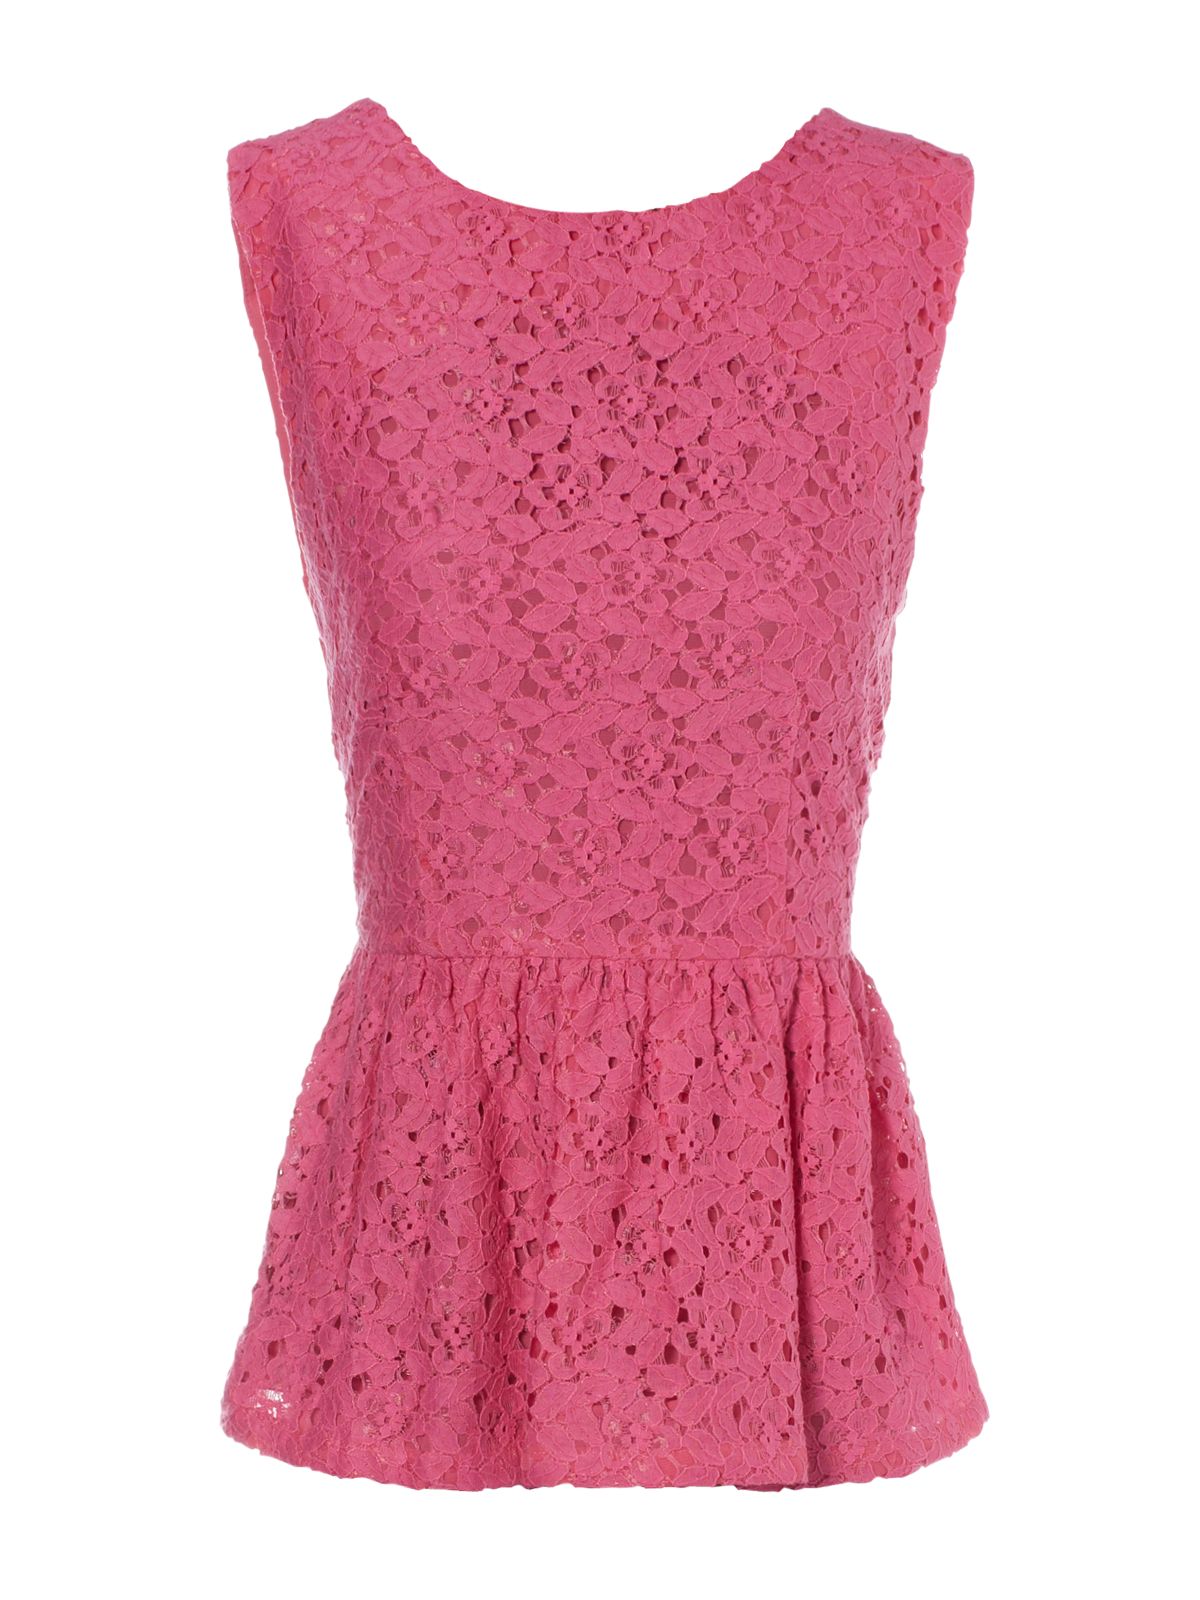 Jane Norman Pink Lace Peplum Top in Pink | Lyst